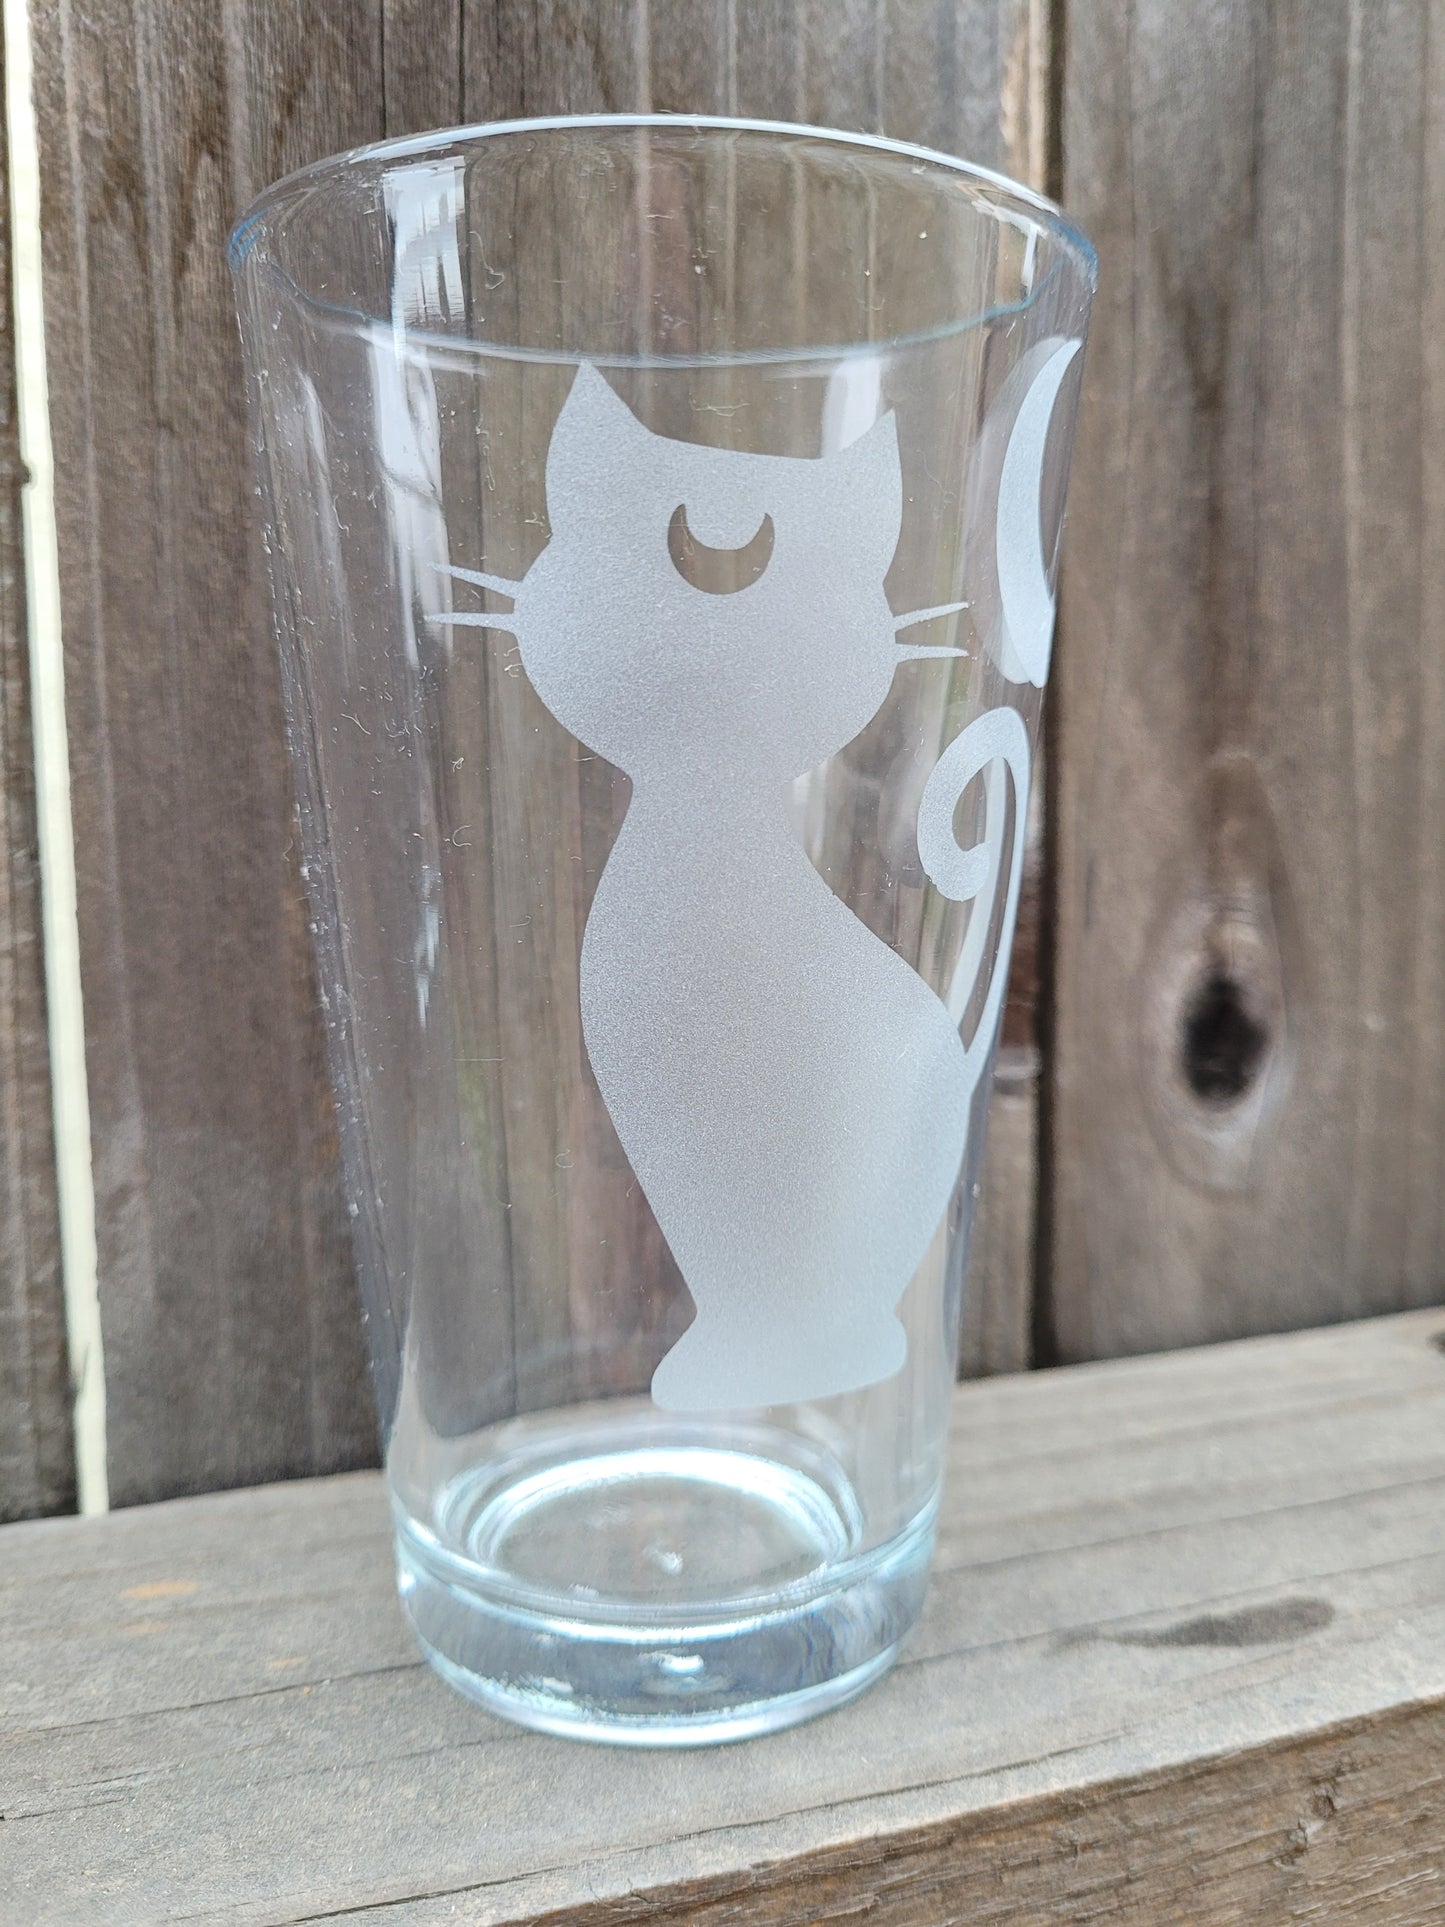 Luna (Full Body, Sailor Moon) Pint Glass - Made to Order